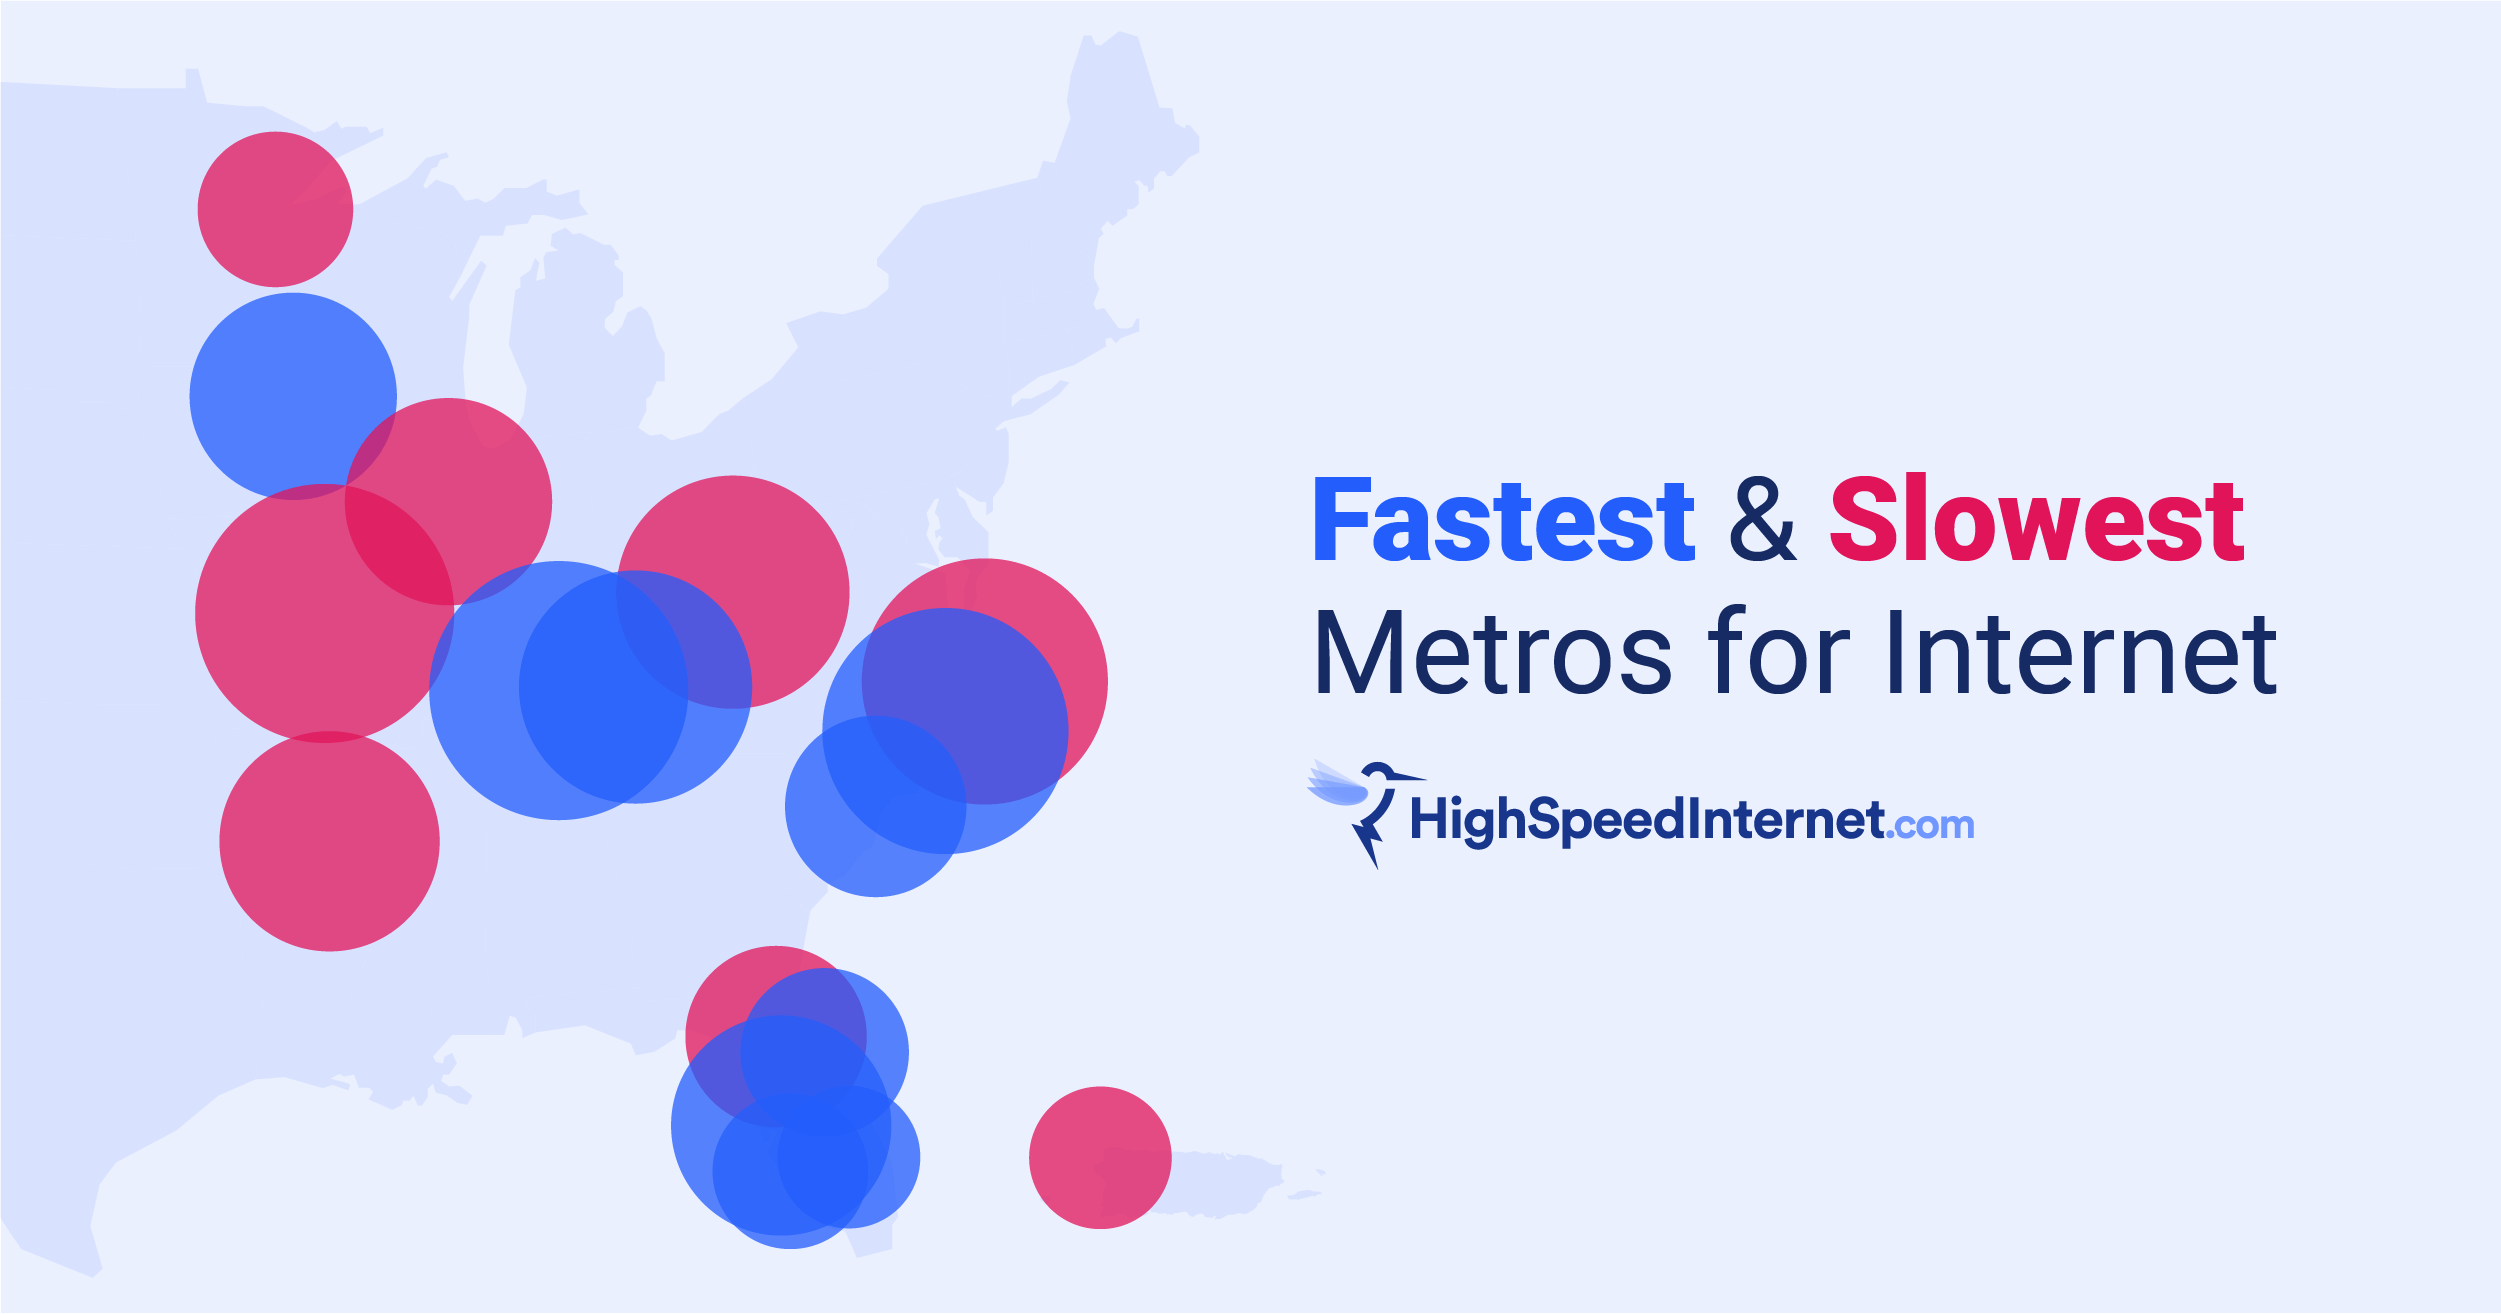 The US metropolitan areas with the fastest and slowest internet speeds in 20204